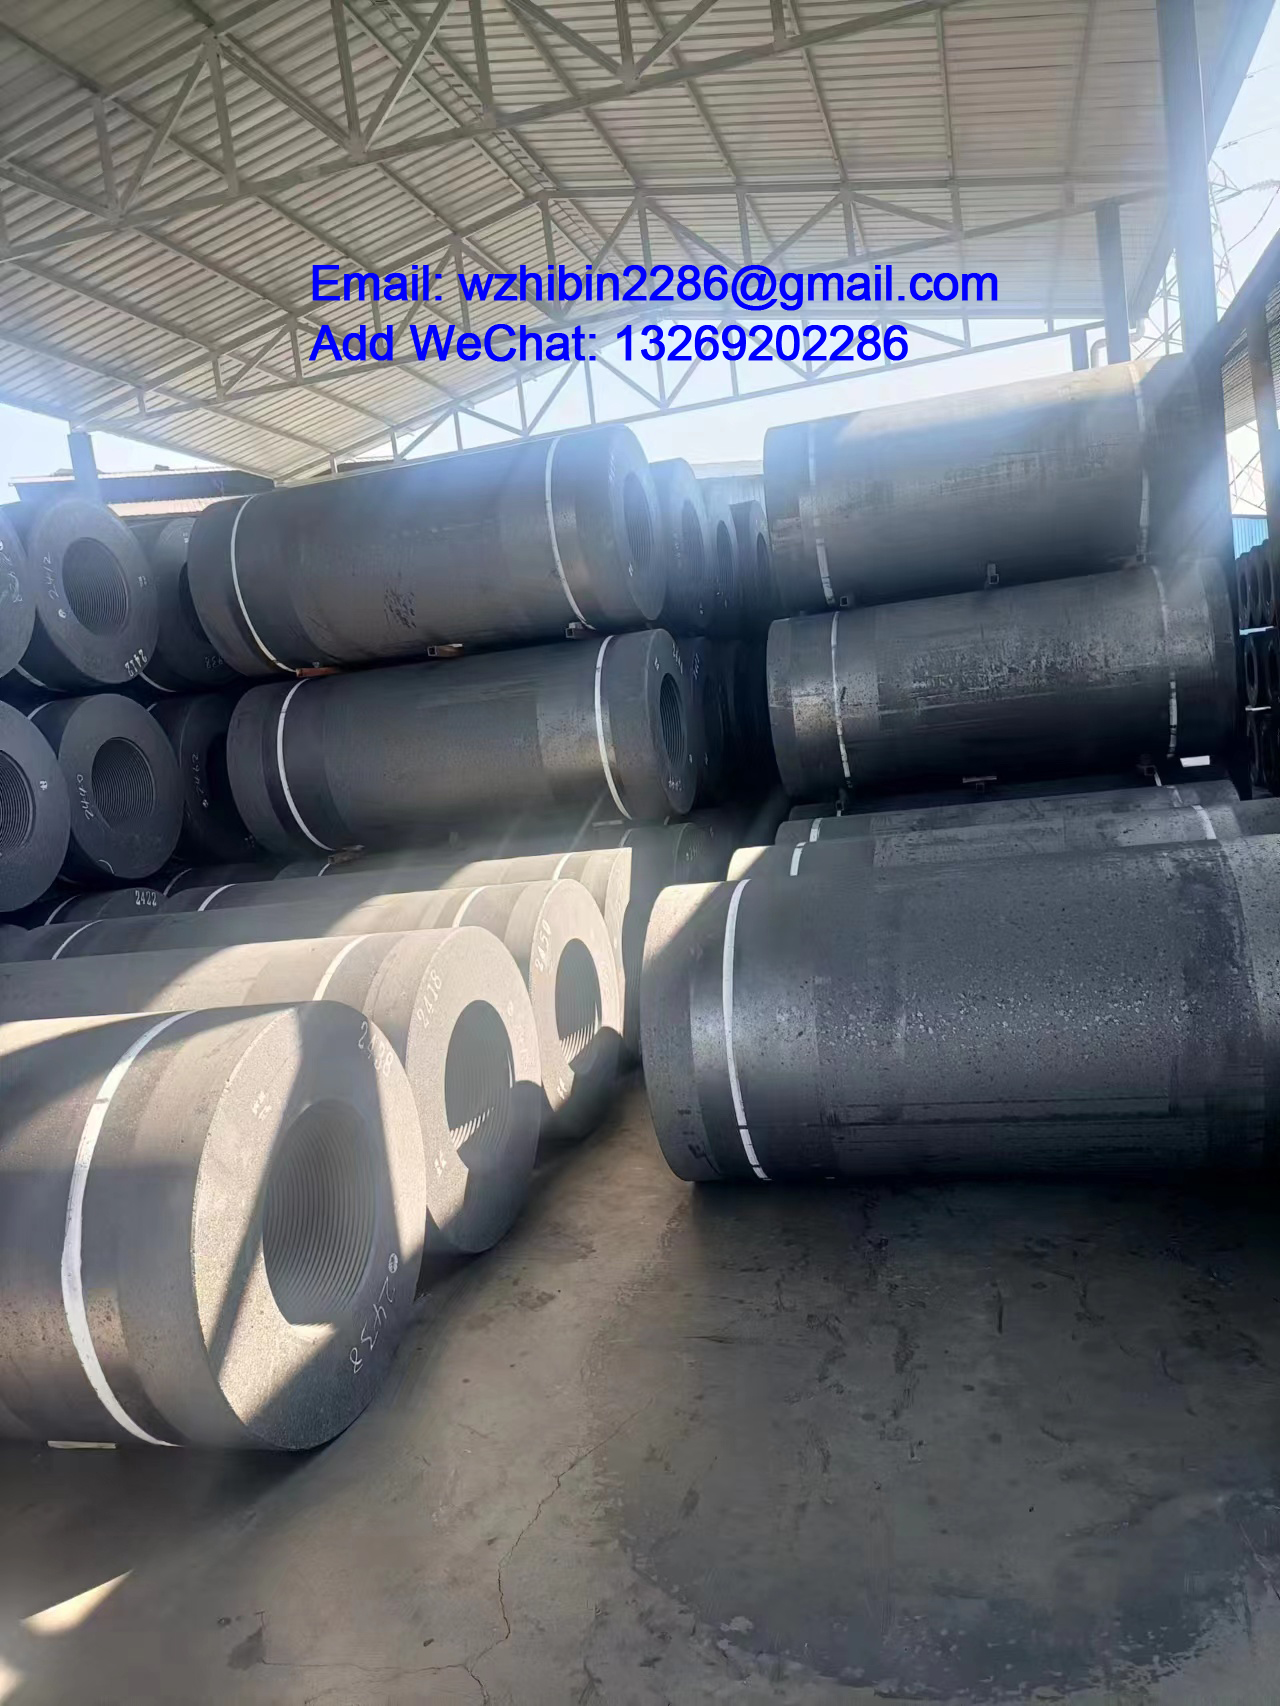 Hebei, China, supplies graphite electrodes of multiple specifications worldwide